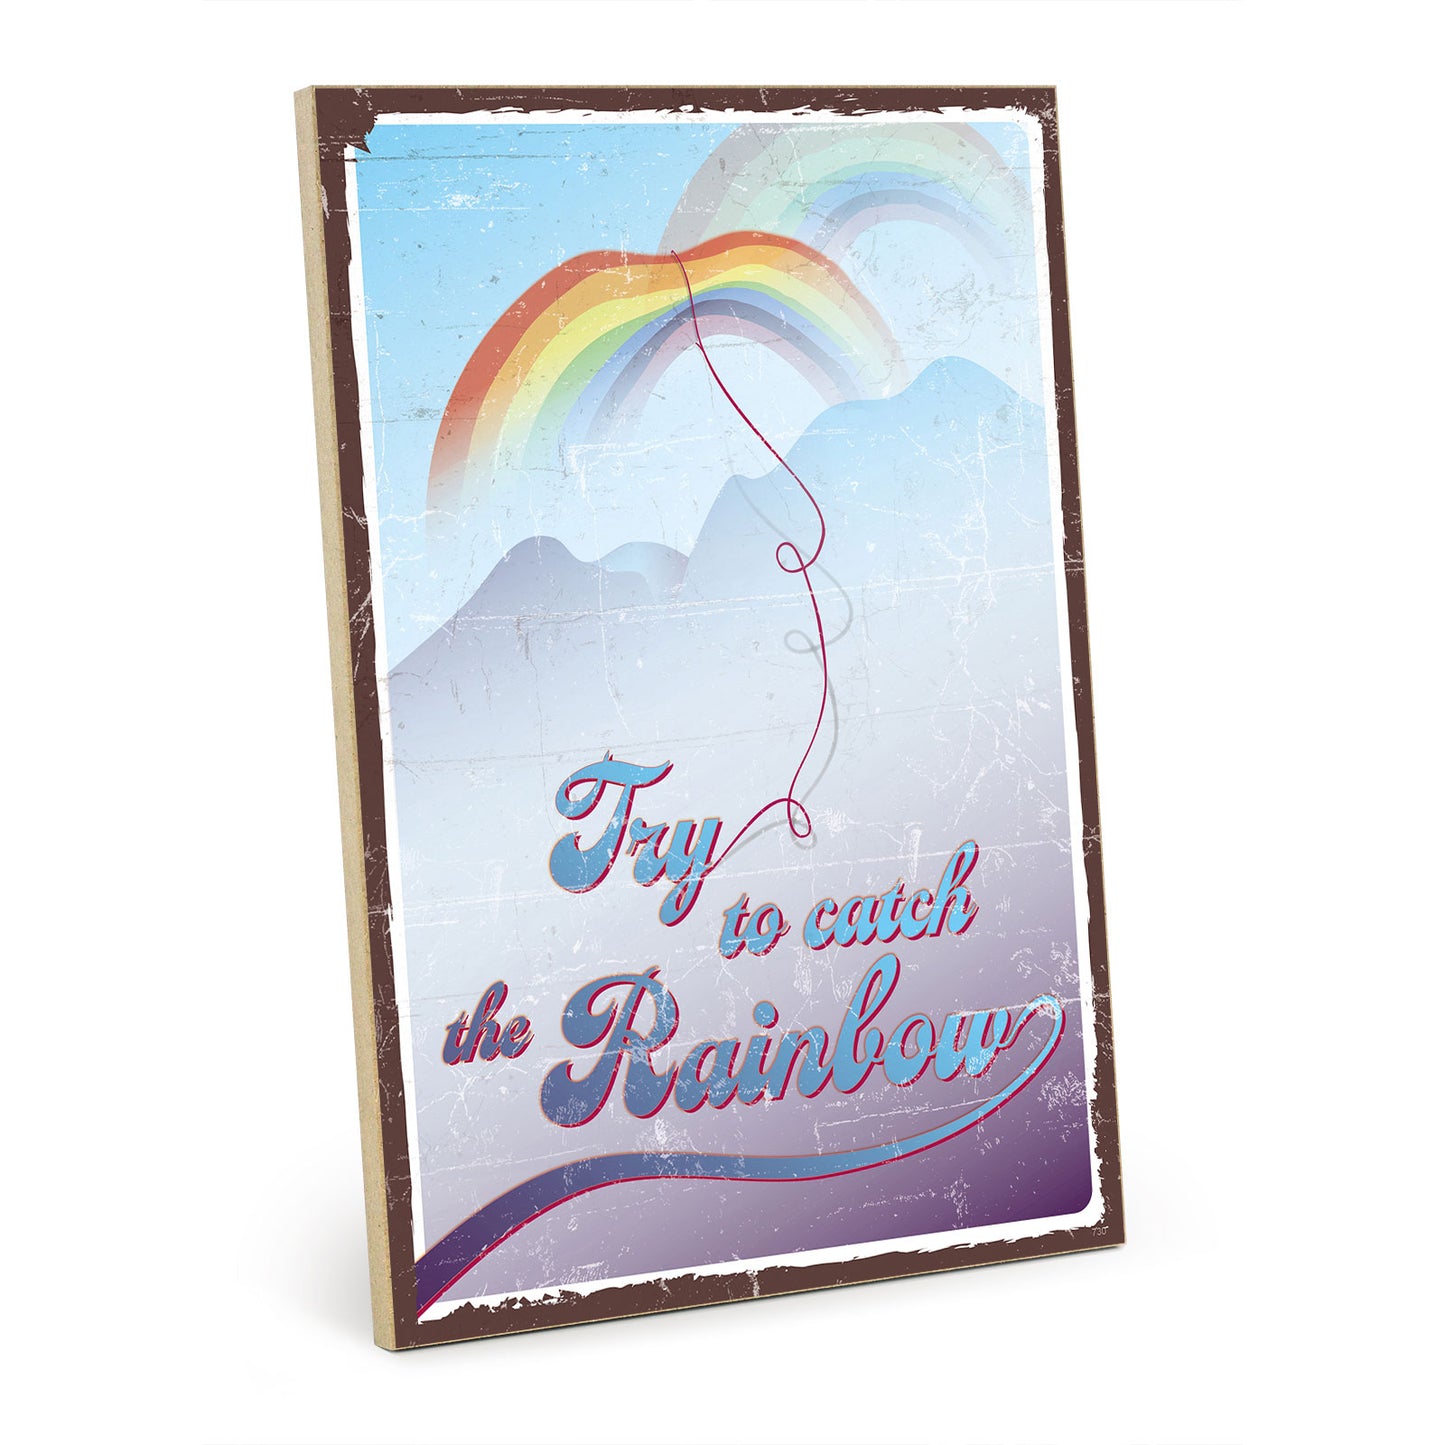 Holzschild mit Spruch - Hygge - Try to catch the rainbow – HS-GH-00732